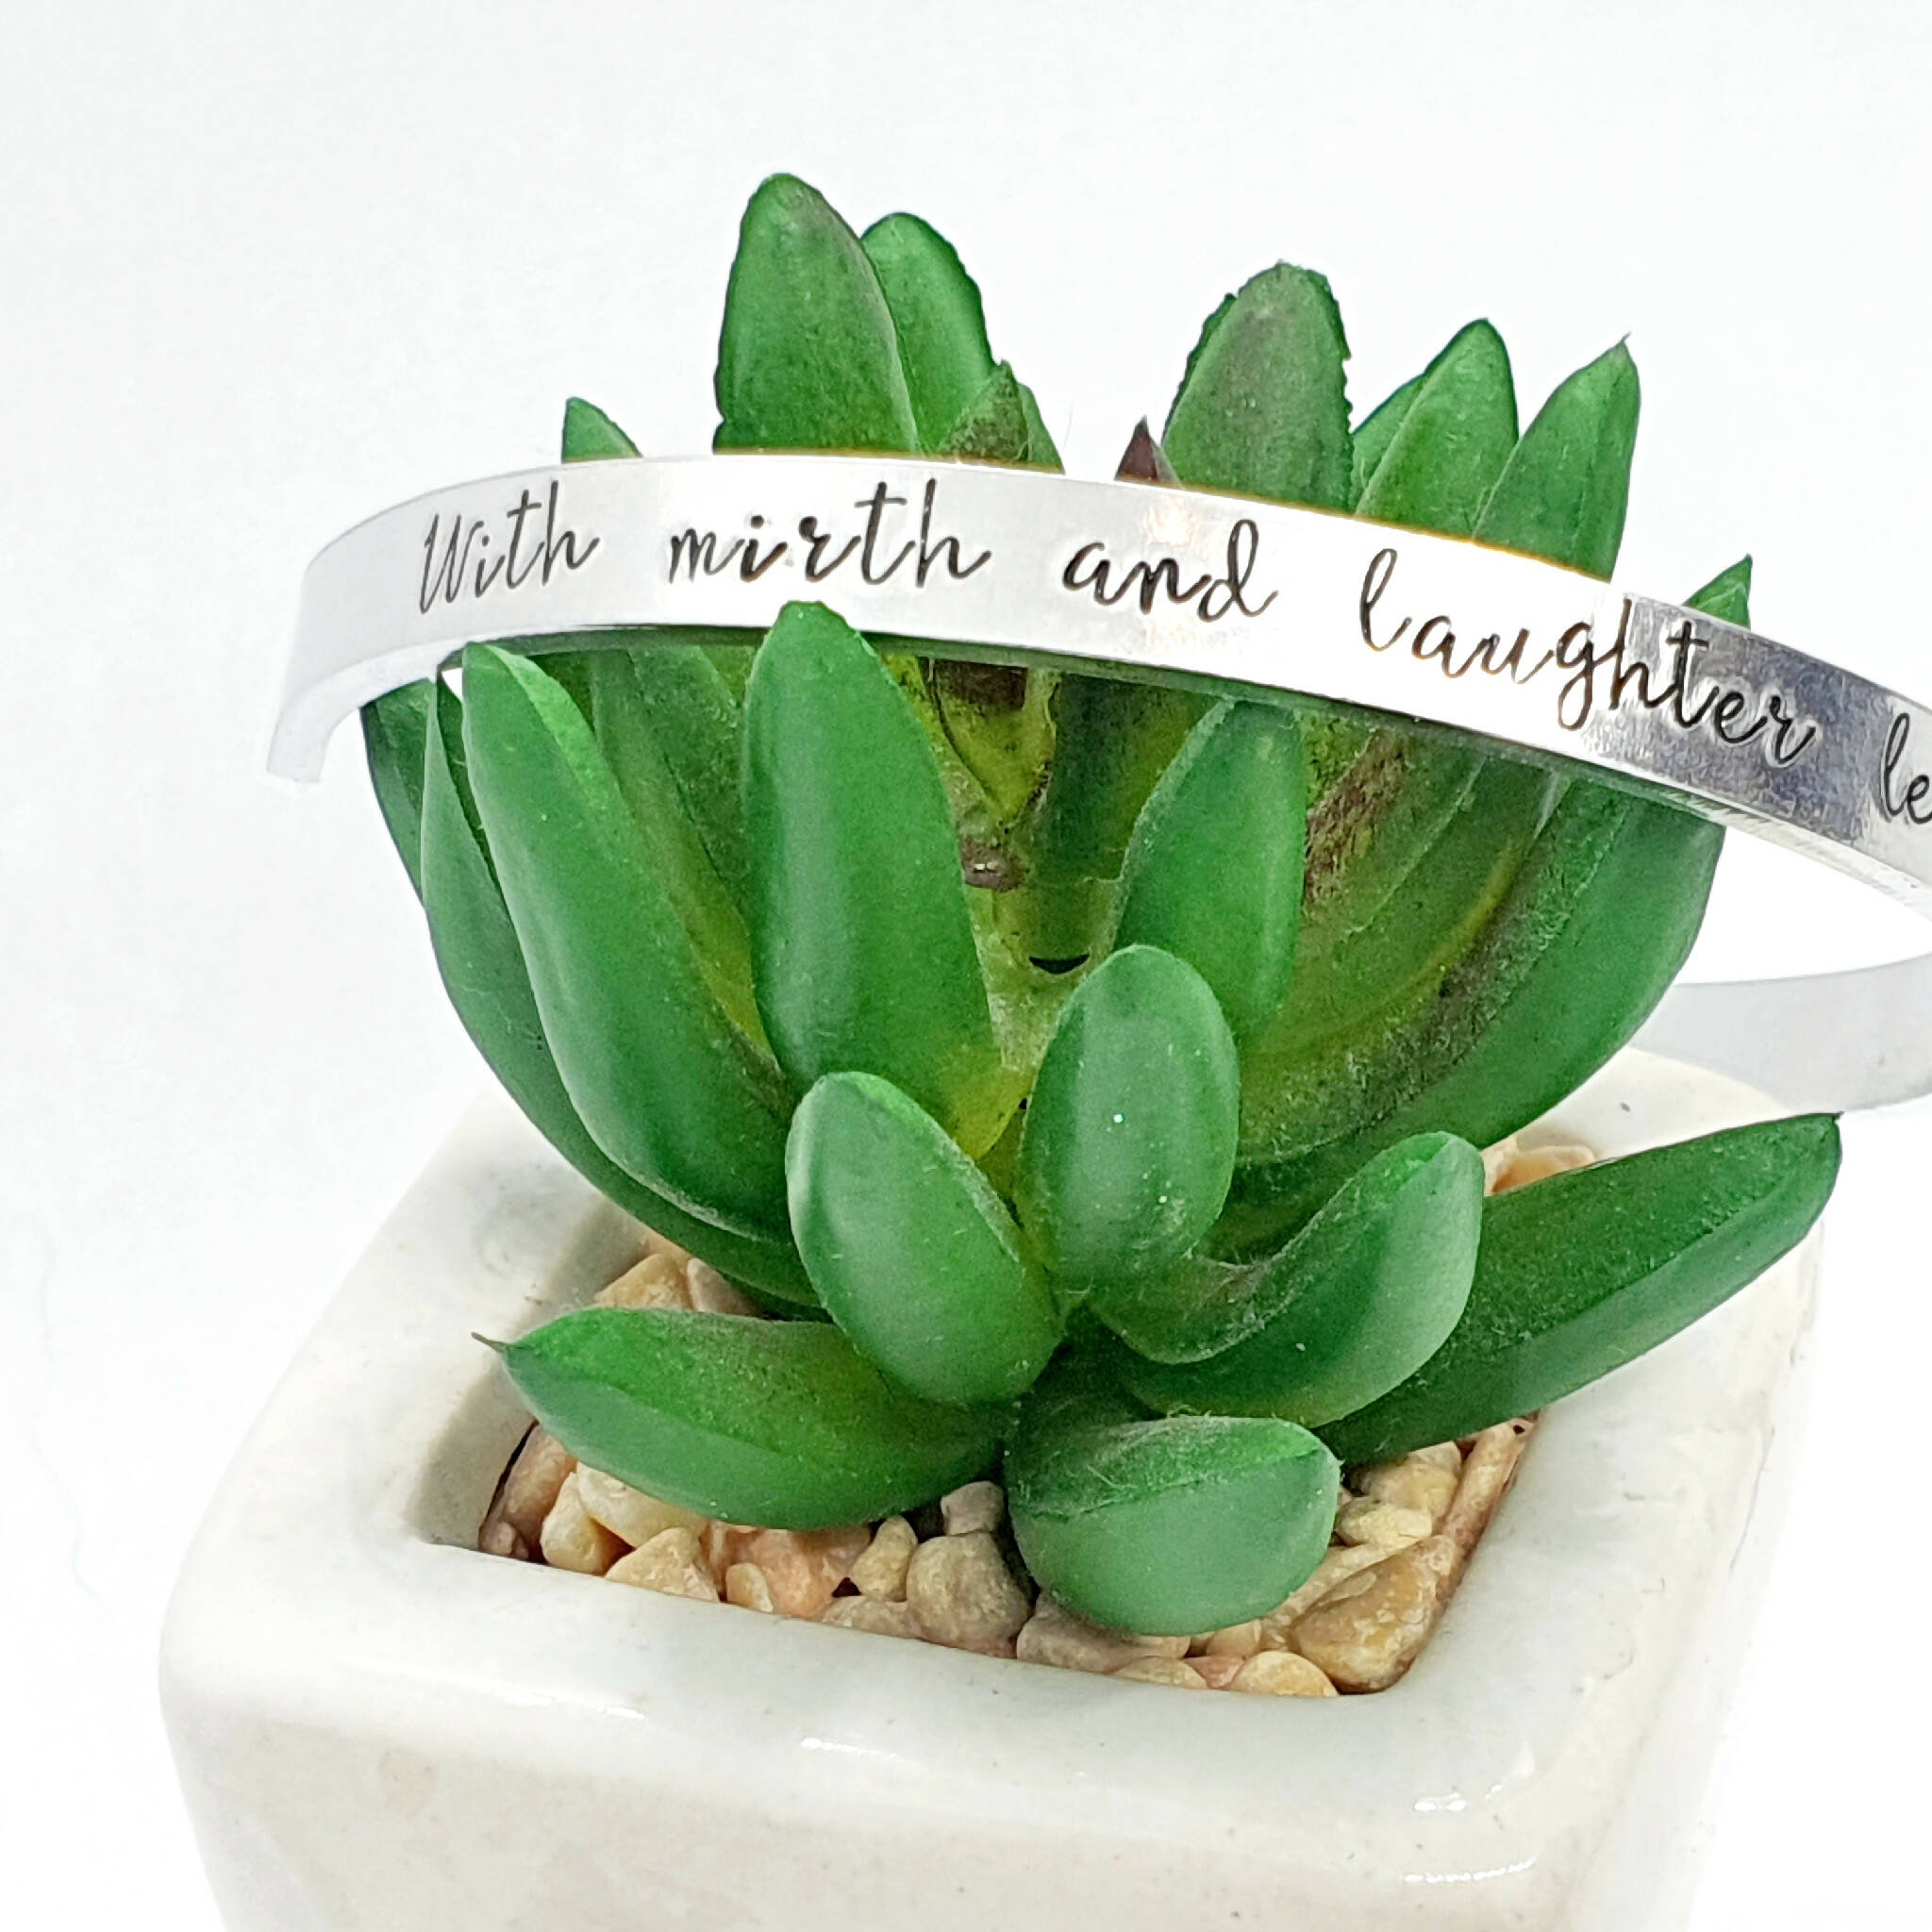 The Merchant of Venice 'With Mirth and Laughter Let Old Wrinkles Come' Aluminium Quote Cuff